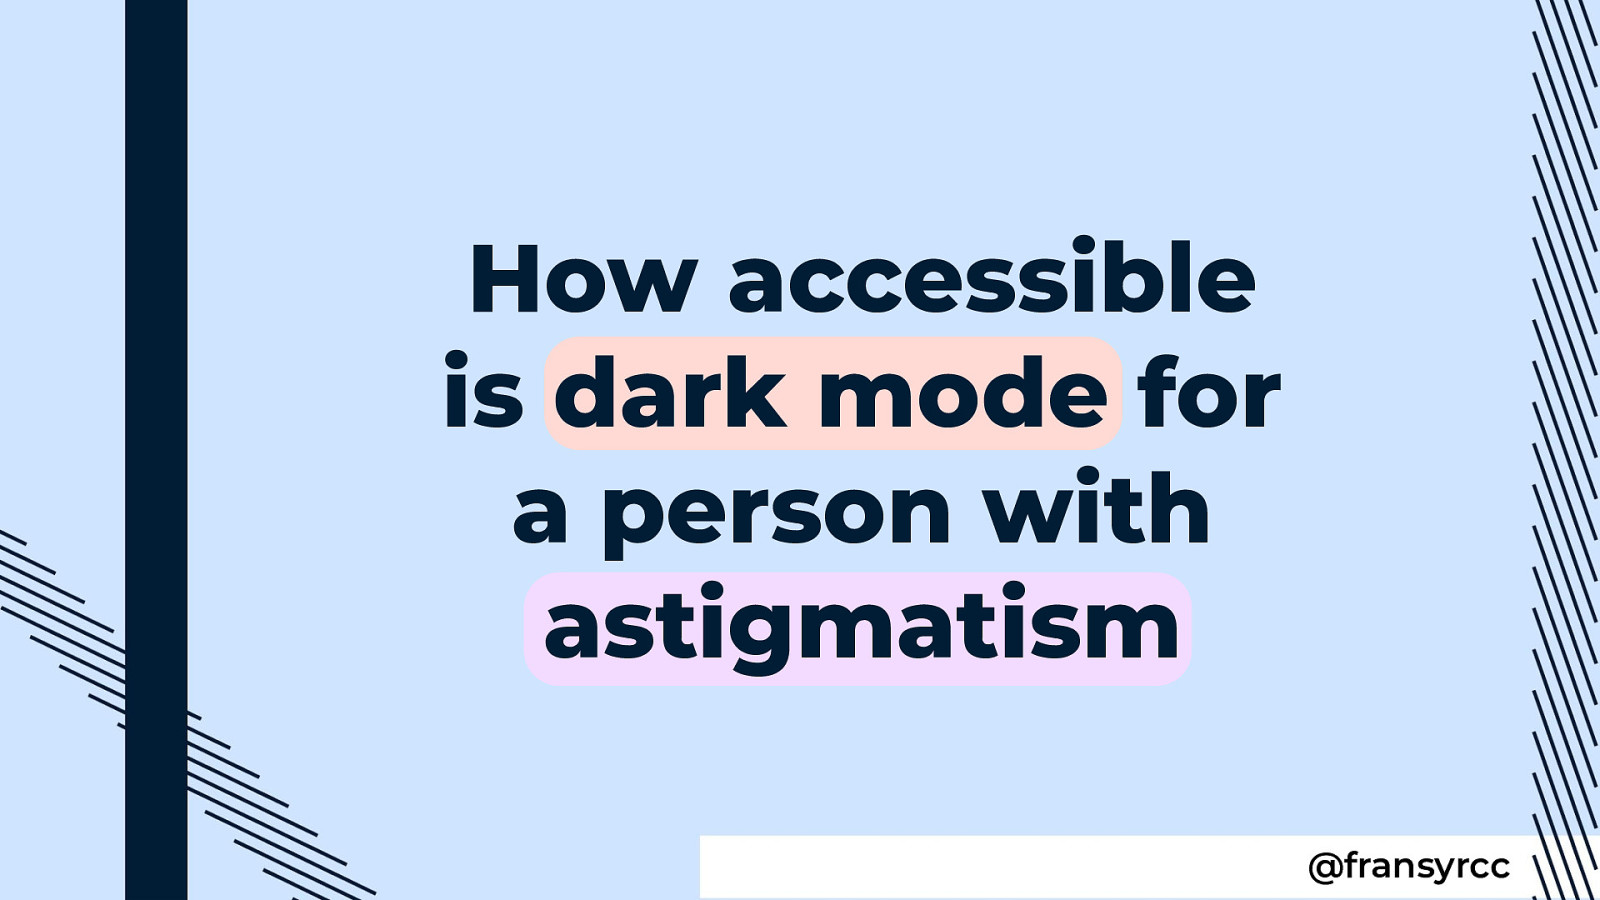 How accessible is dark mode for a person with astigmatism